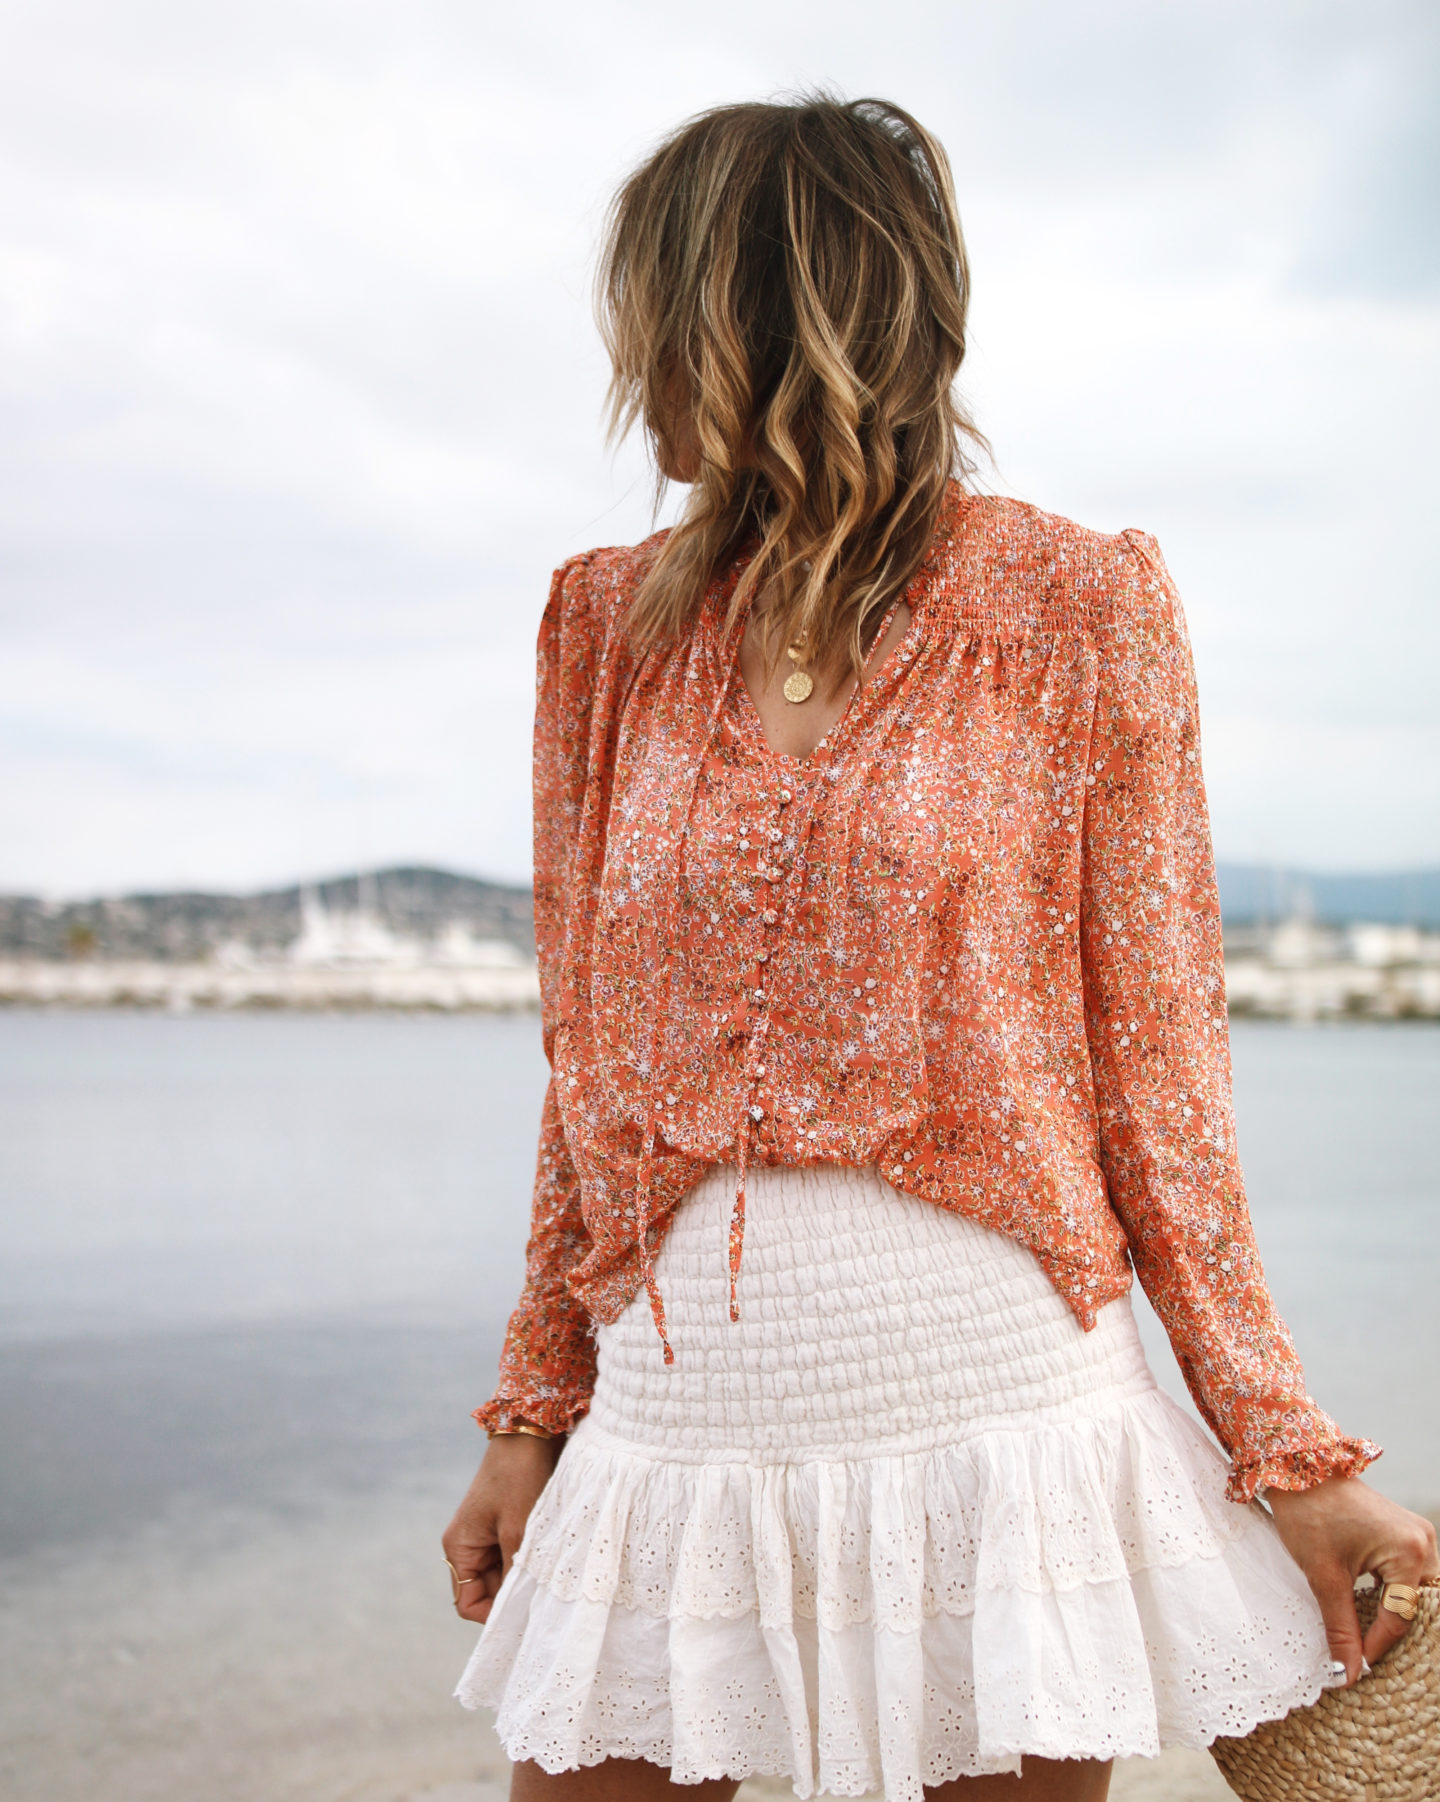 Coral blouse with mini skirt Blouse free people